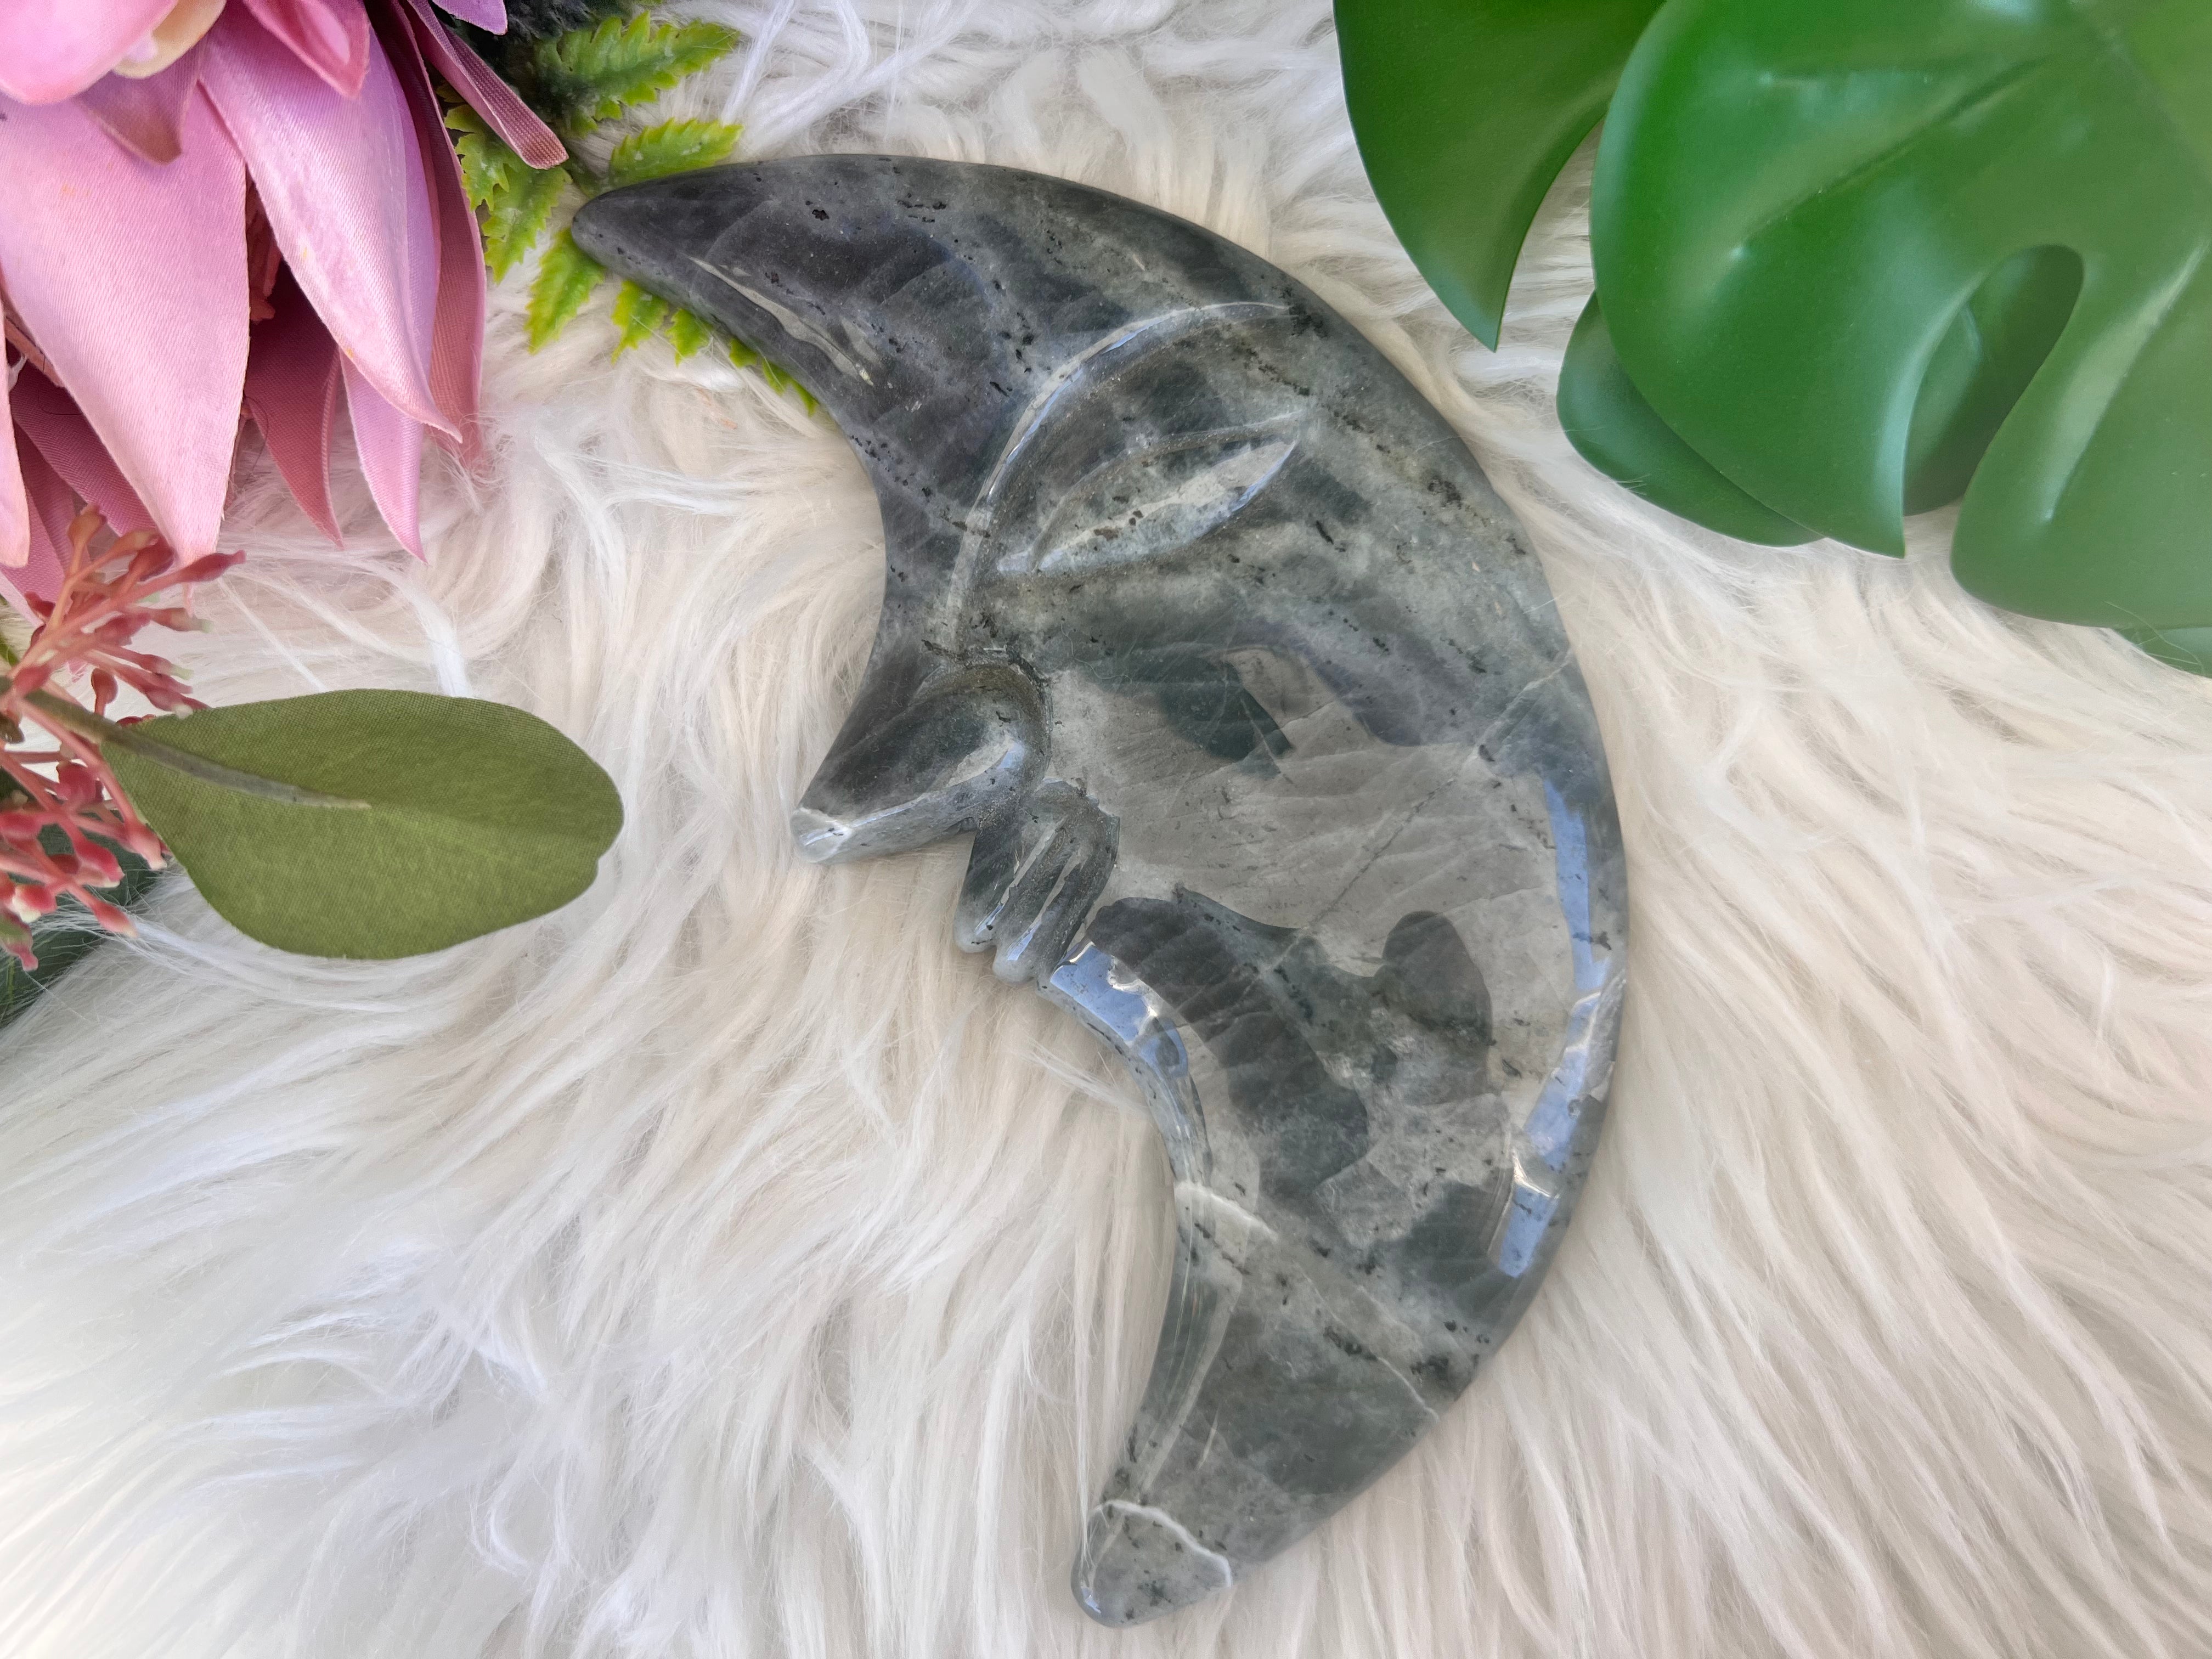 Labradorite Moon Carving - Muse Crystals & Mystical Gifts